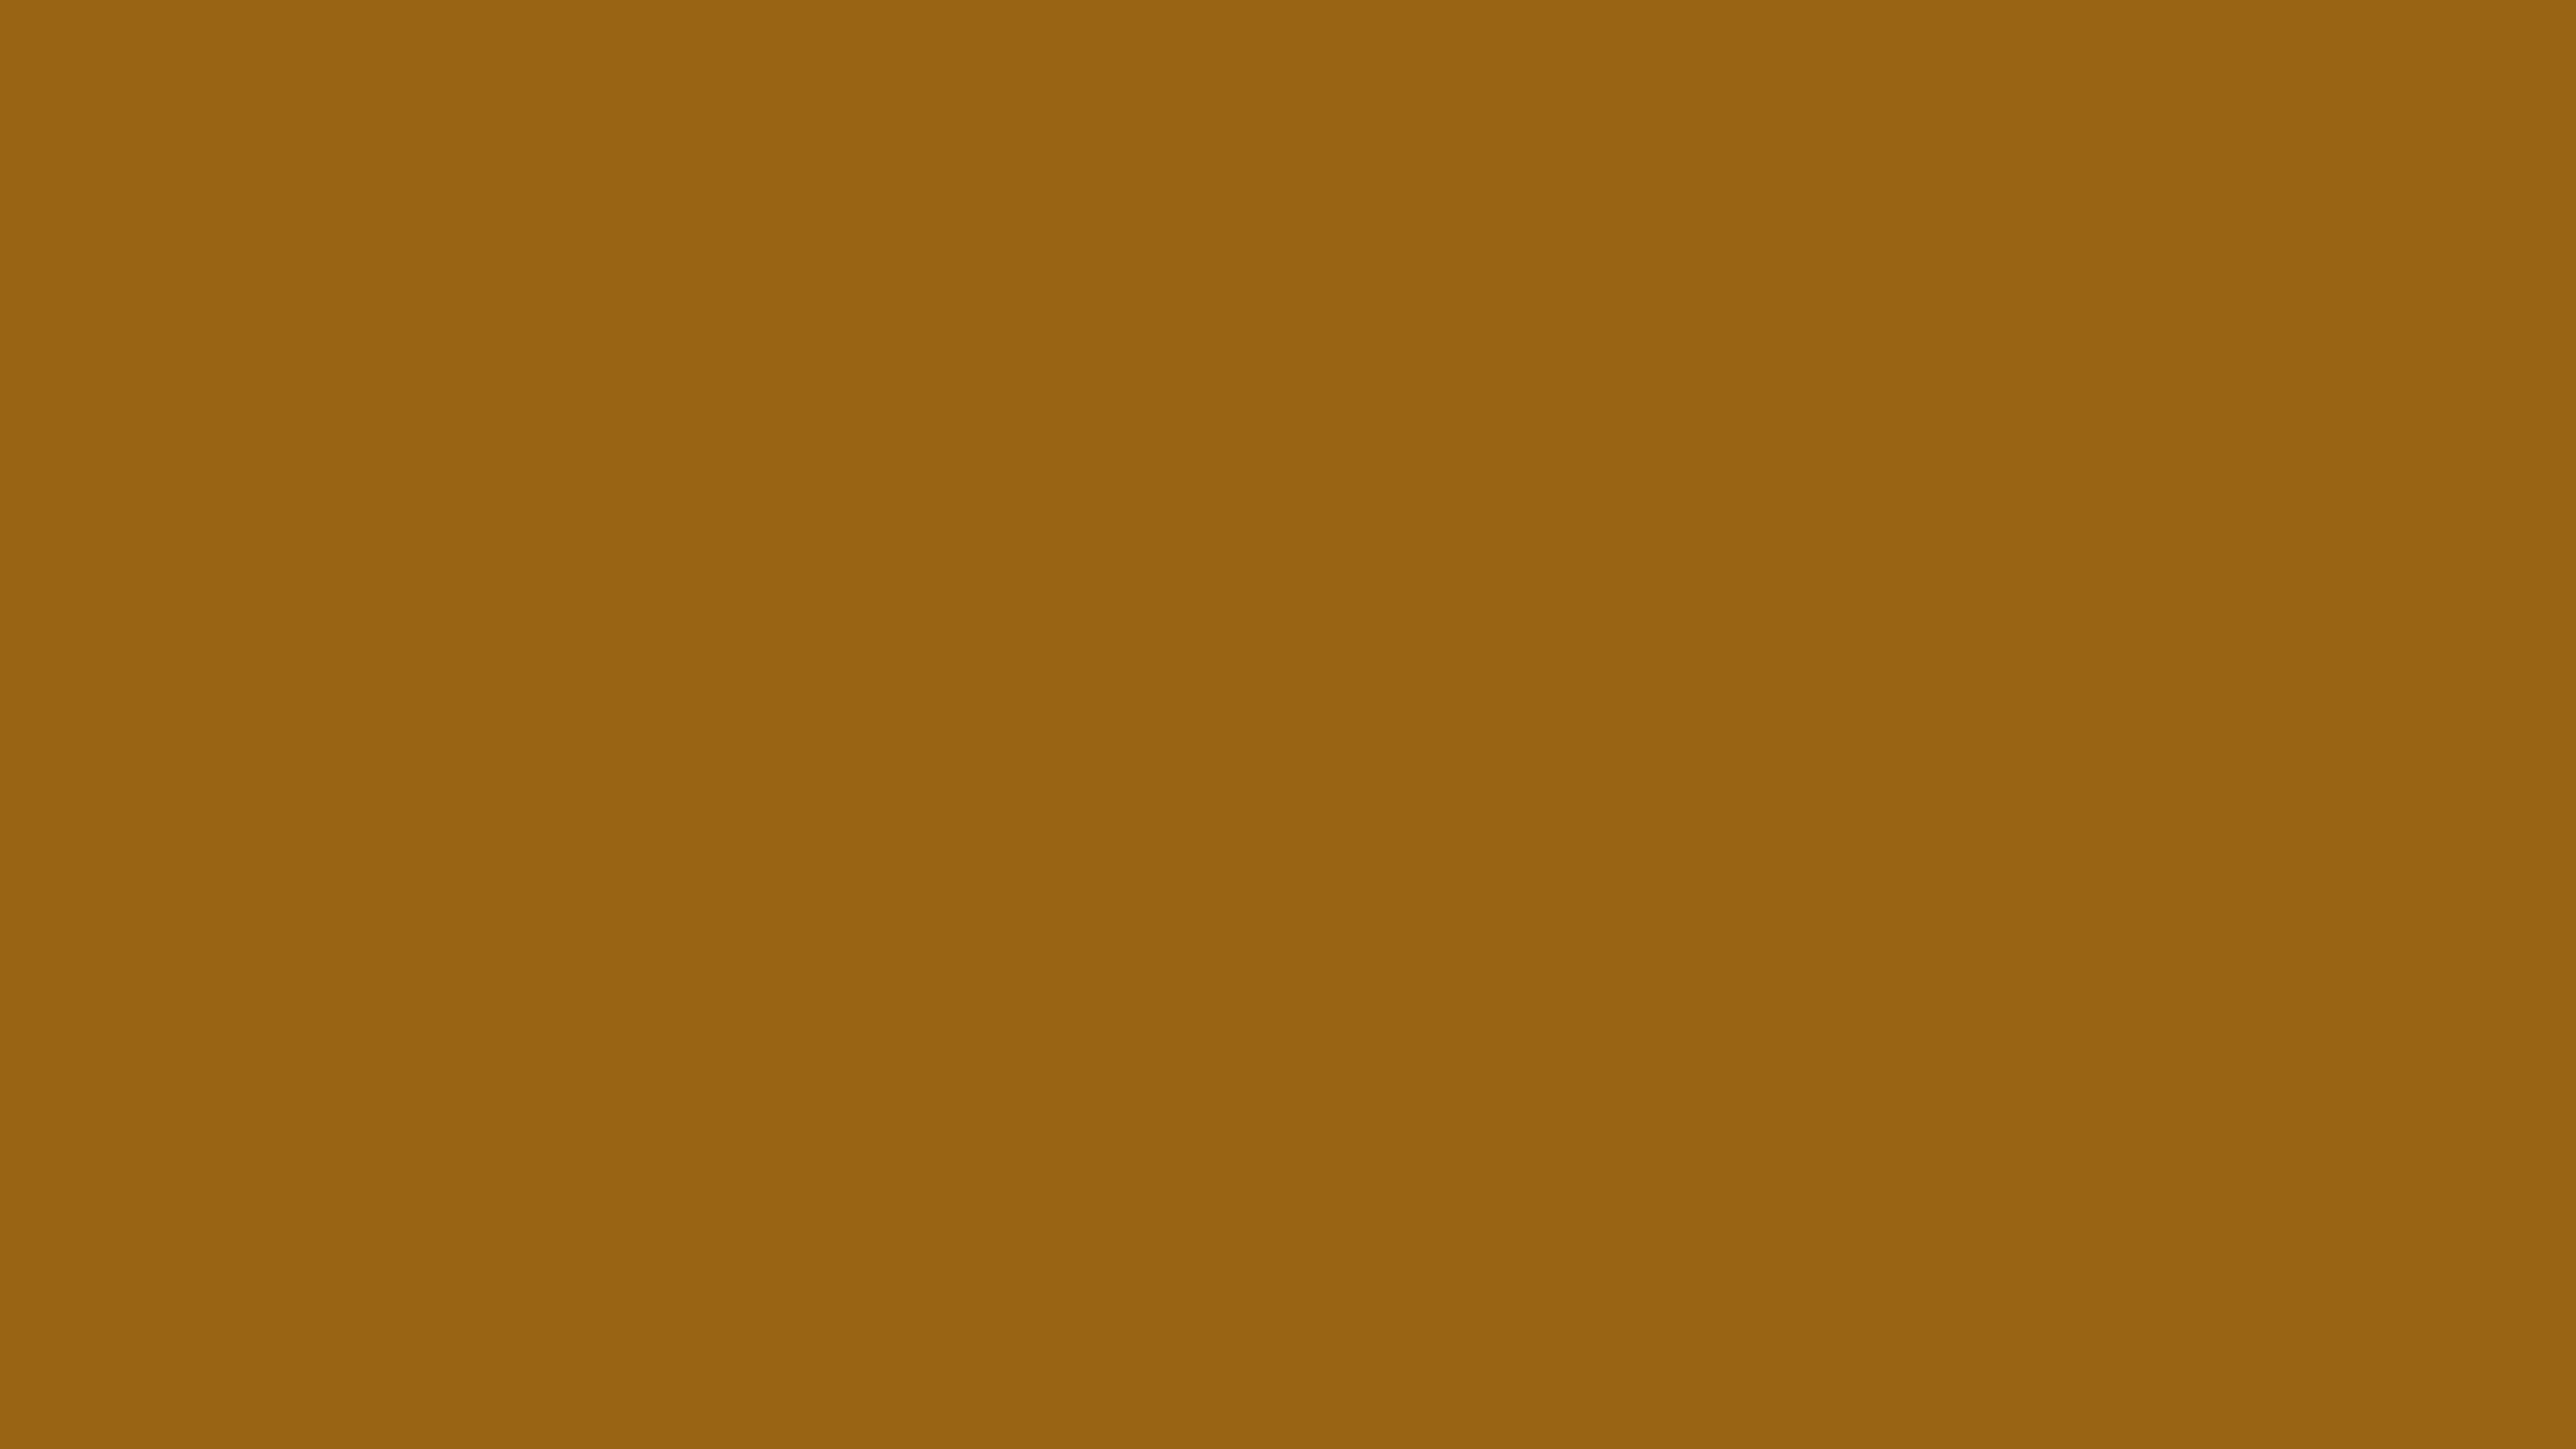 7680x4320 Golden Brown Solid Color Background